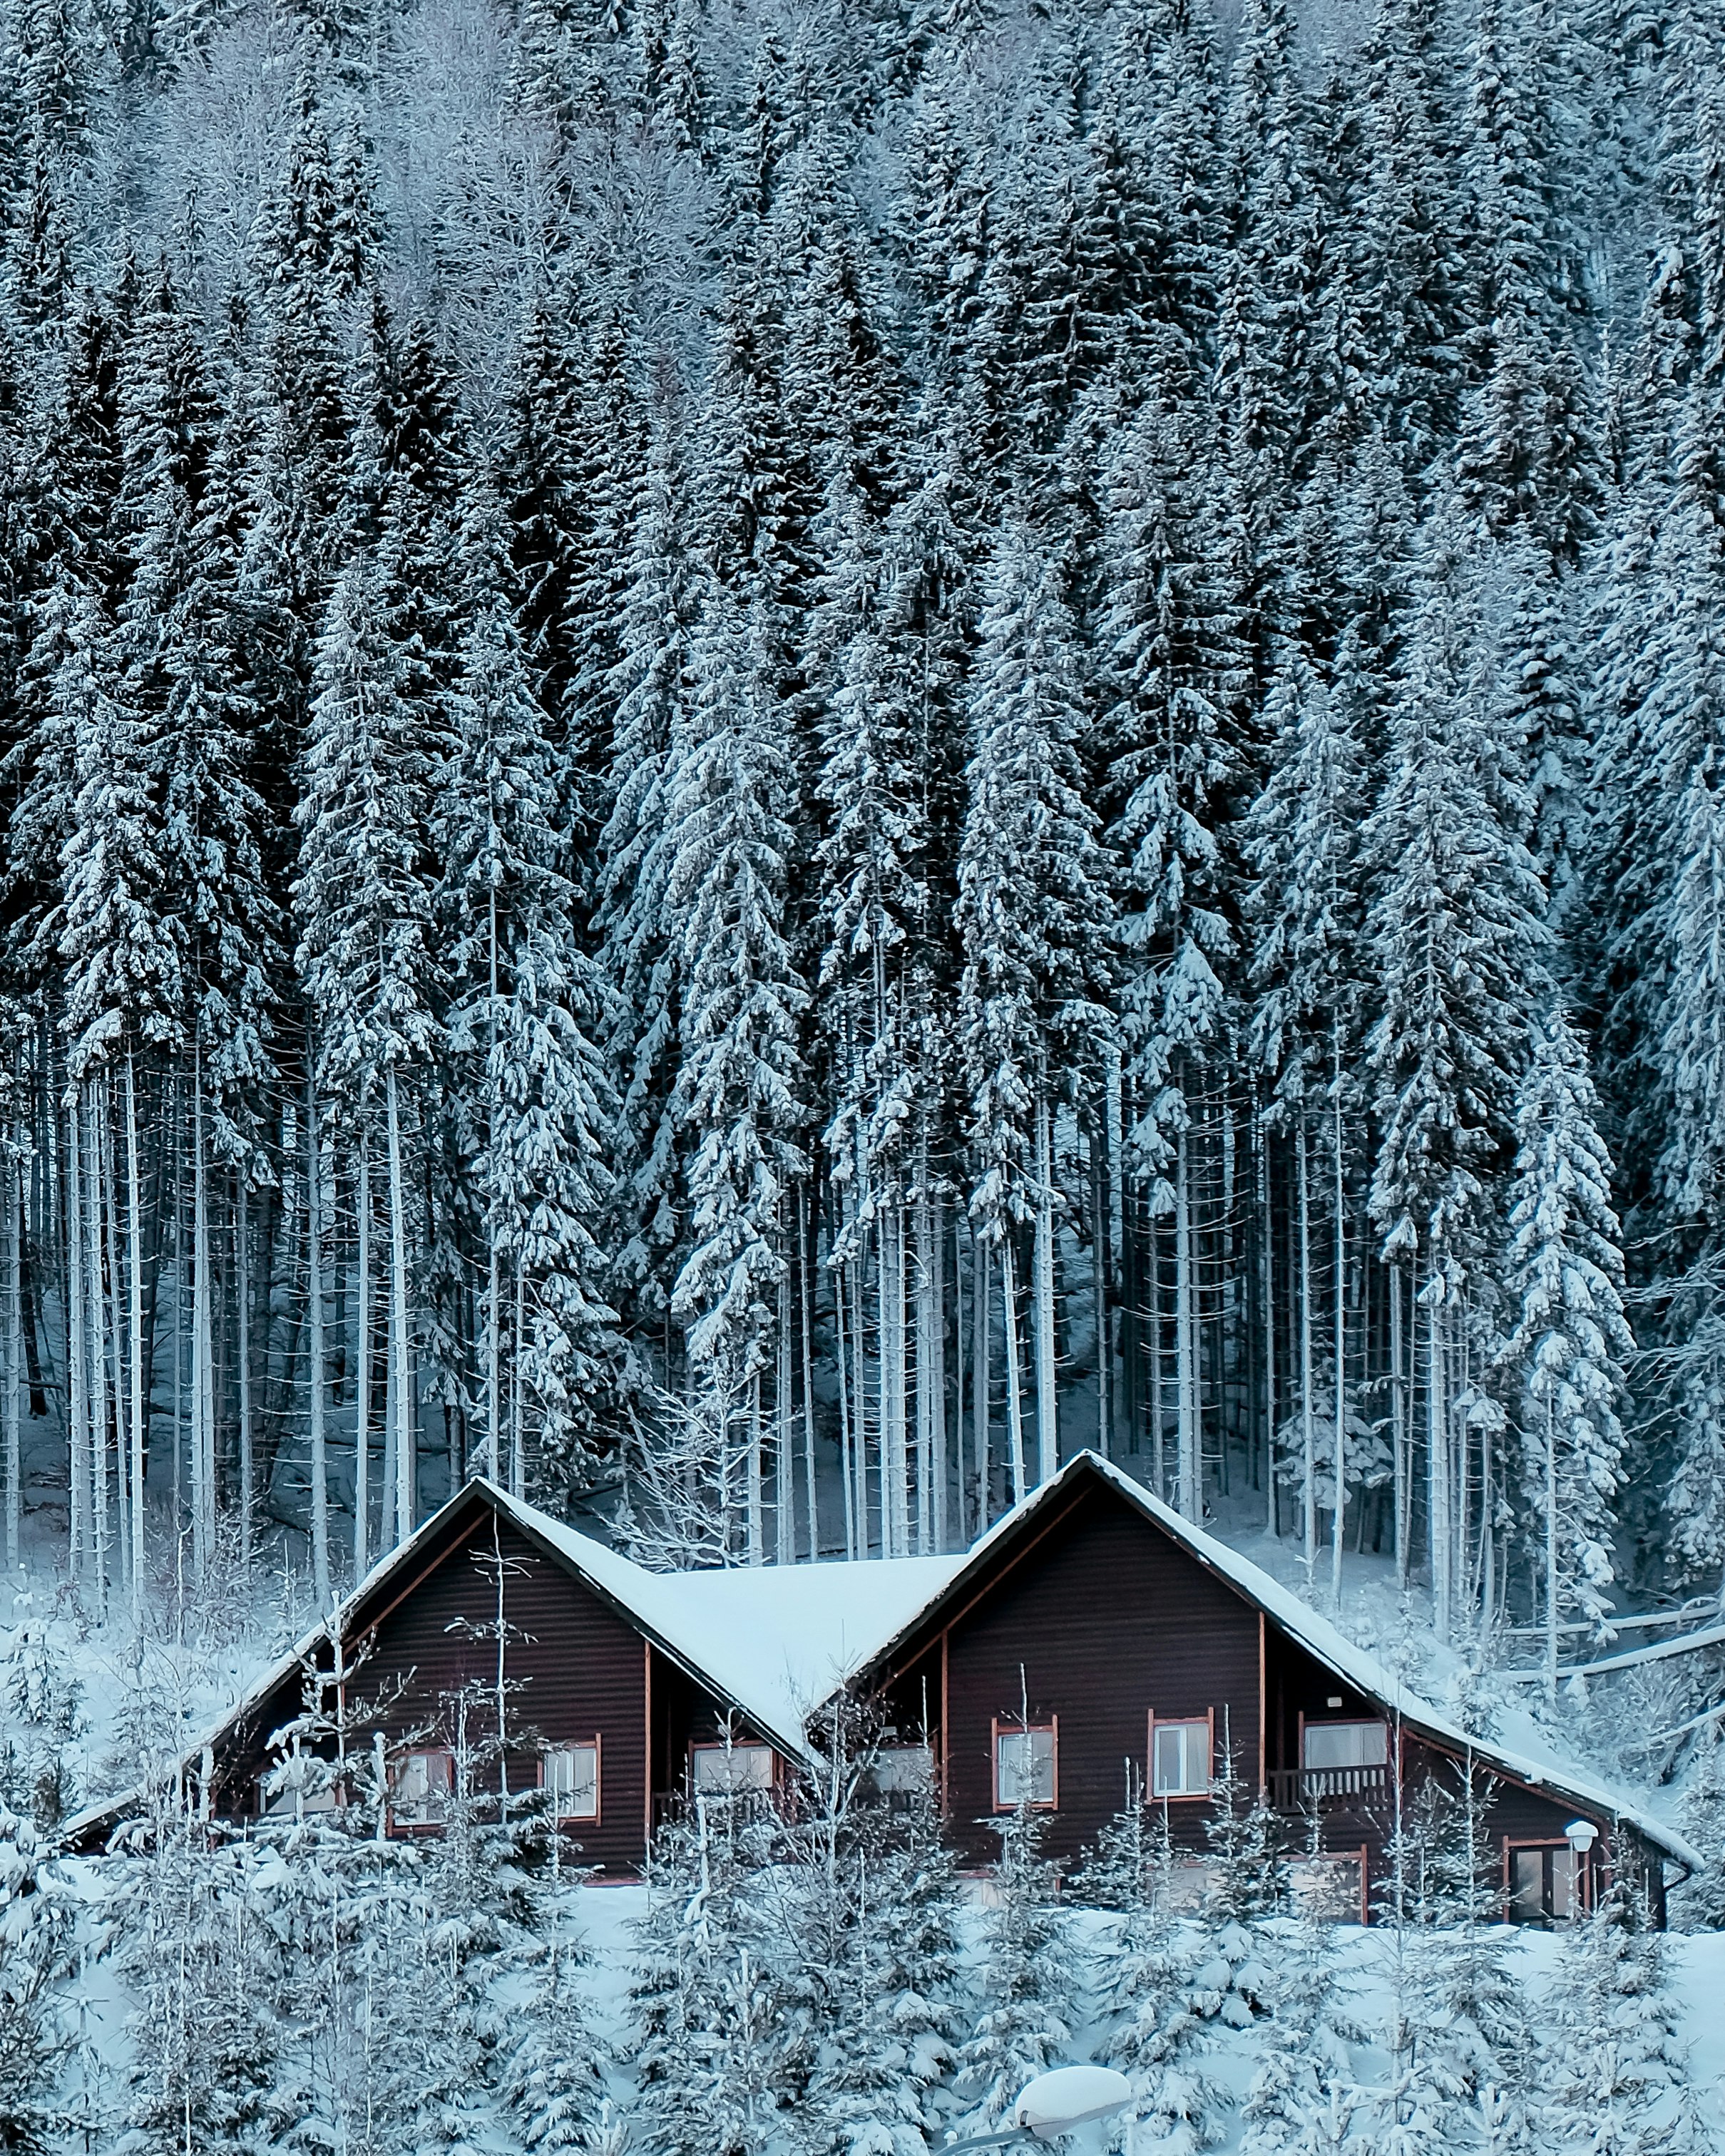 brown wooden house in the middle of forest